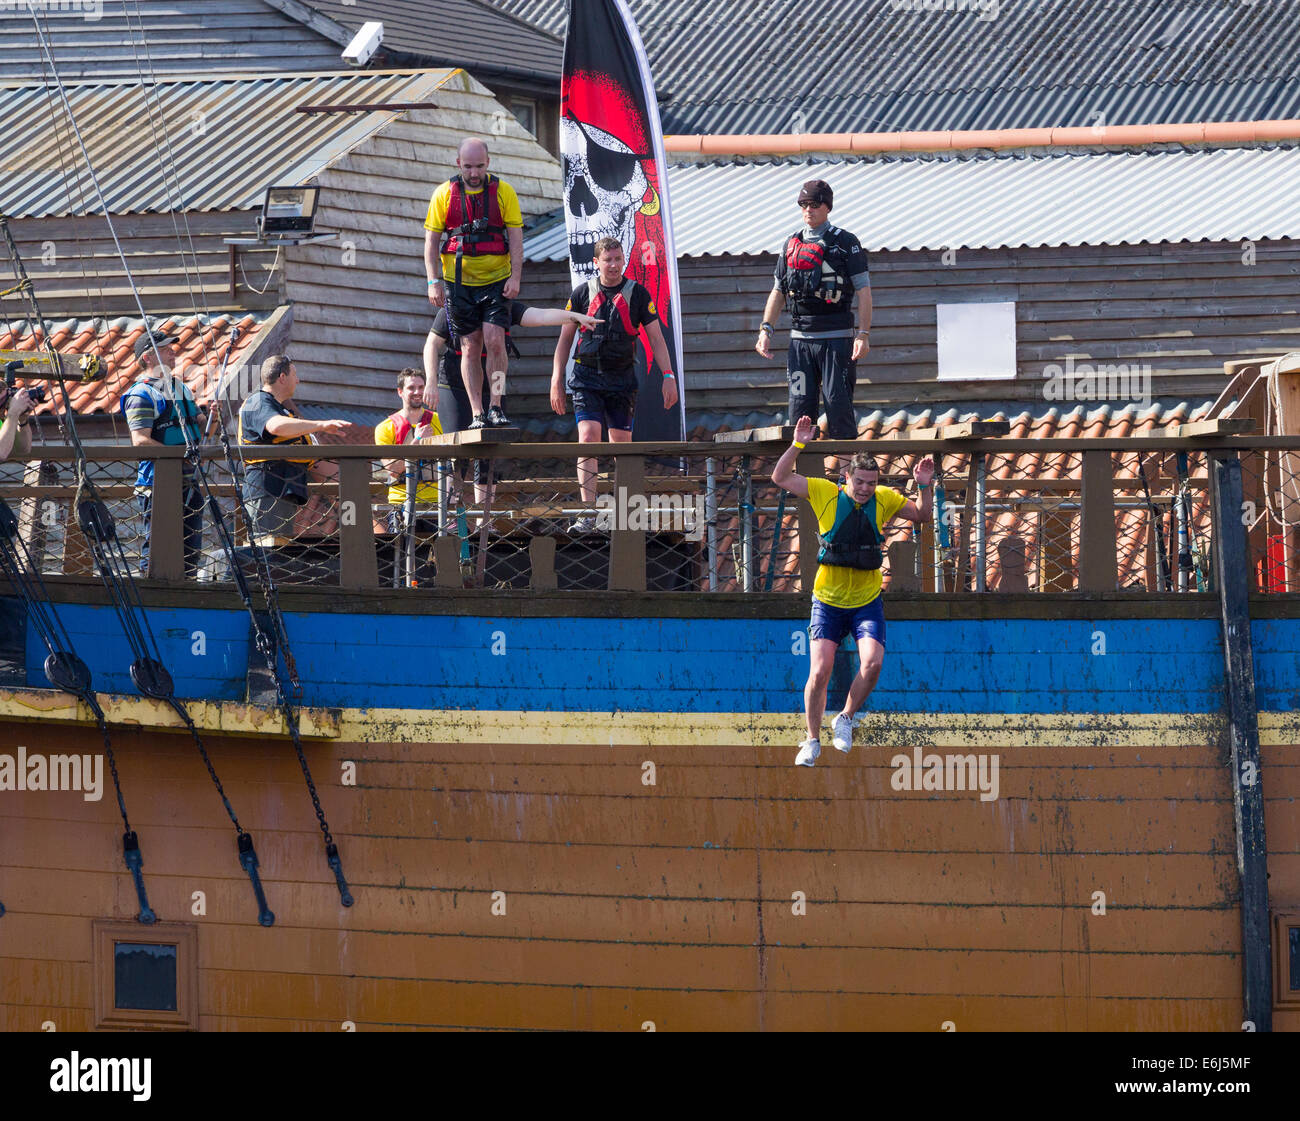 Stockton on Tees, UK. 24th August, 2014. Competitors walking the plank on HMS Endeavour replica  at the 2014 Stockton River Rat Race, a 10km run with land and water obstacles along the banks of the river Tees. Credit:  ALANDAWSONPHOTOGRAPHY/Alamy Live News Stock Photo